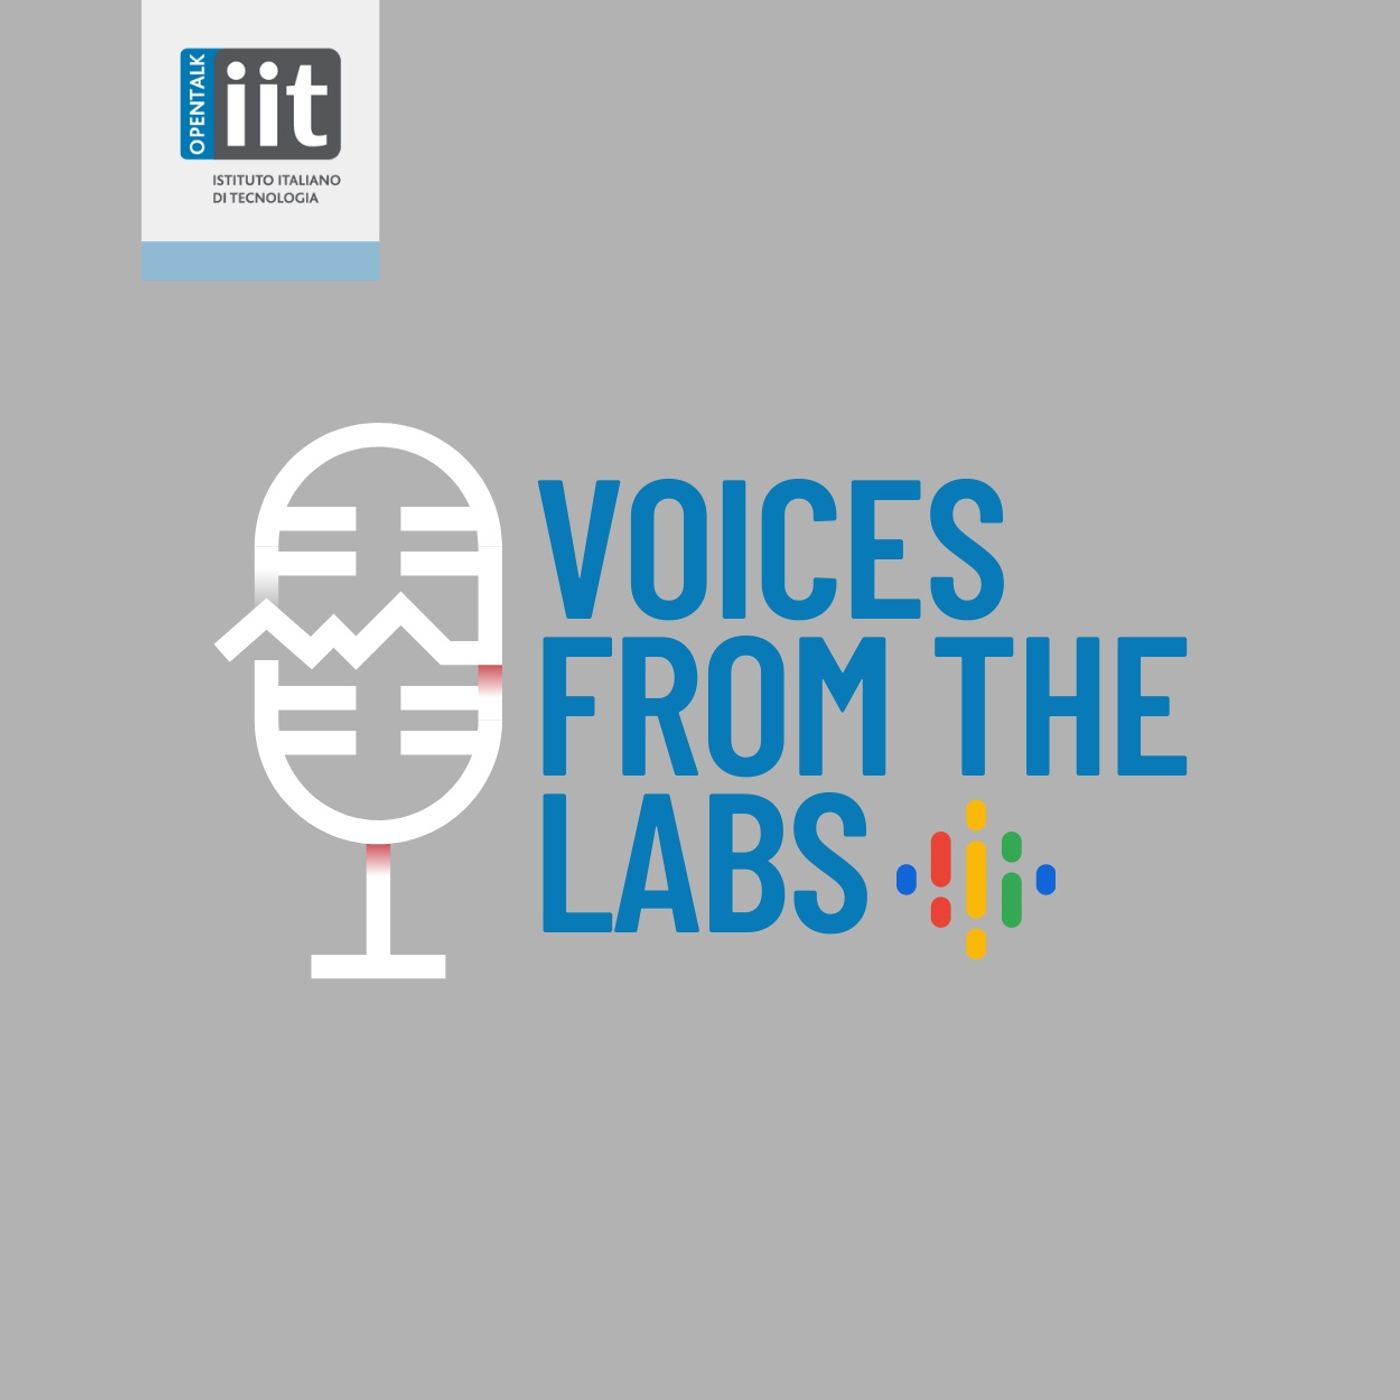 Voices from the labs